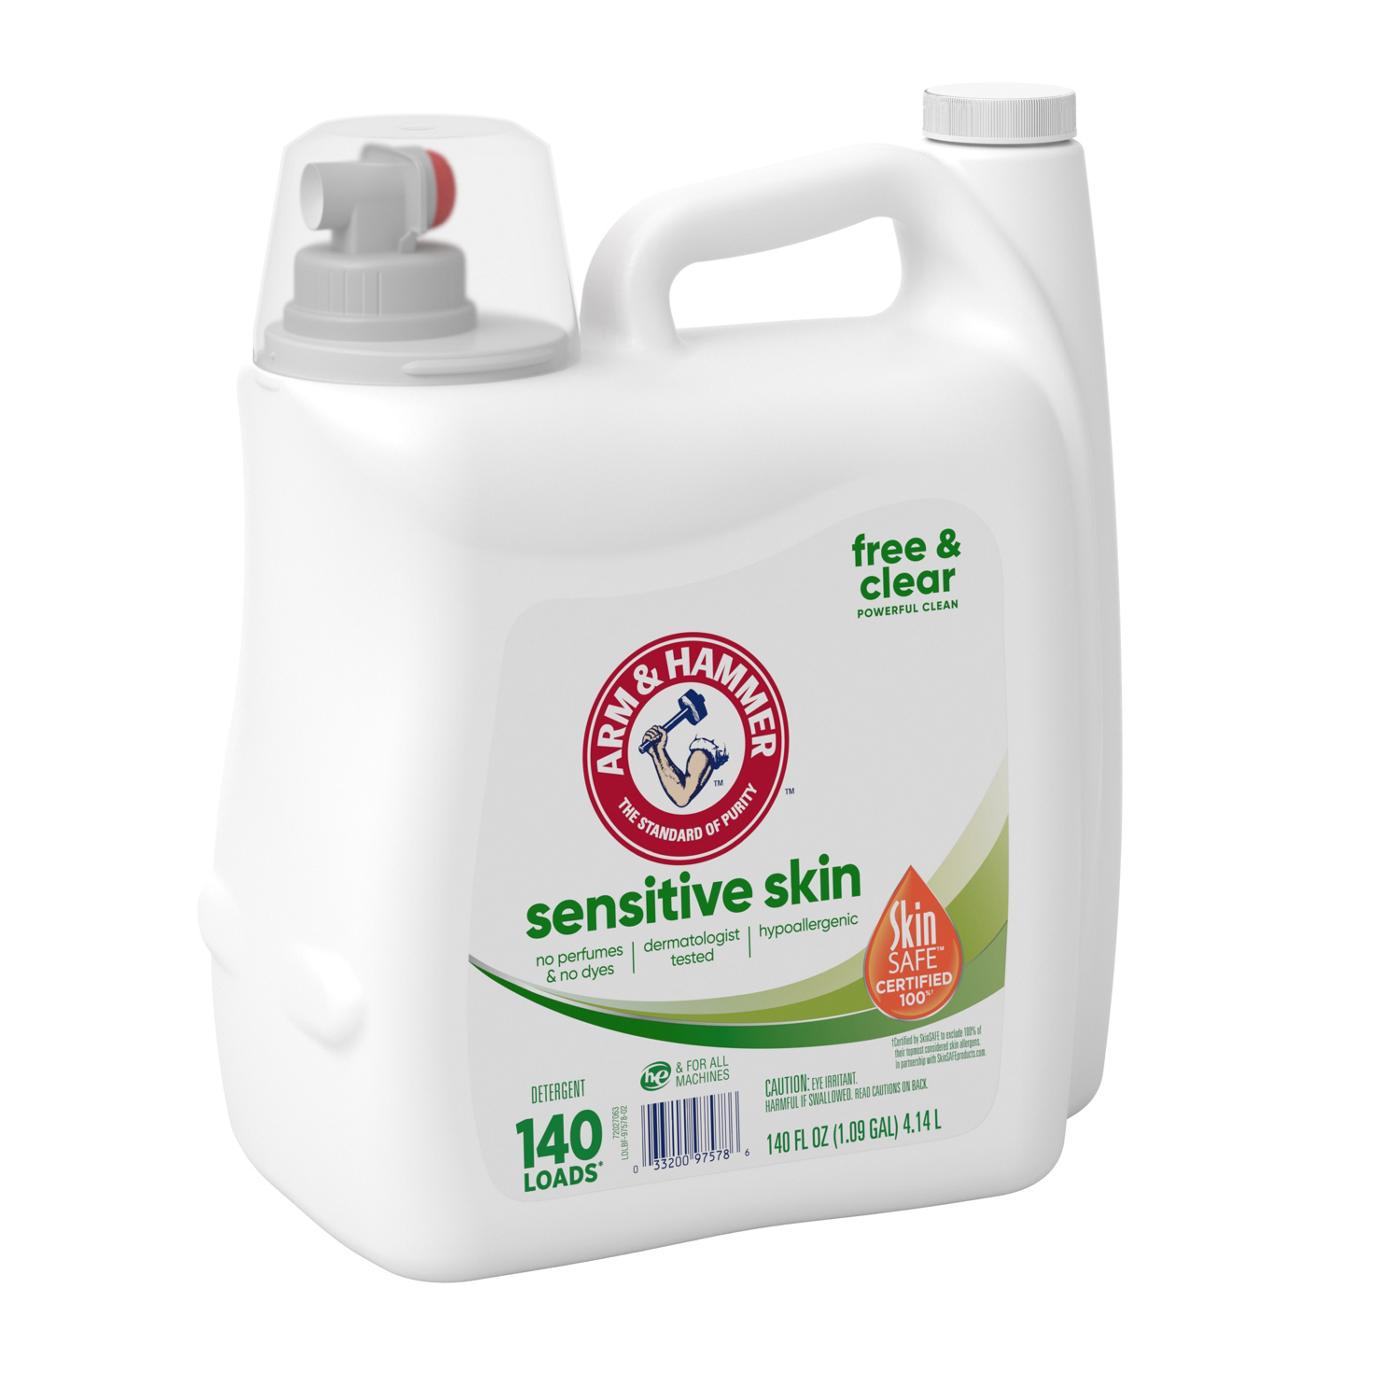 Arm & Hammer Free & Clear HE Liquid Laundry Detergent, 140 Loads; image 3 of 4